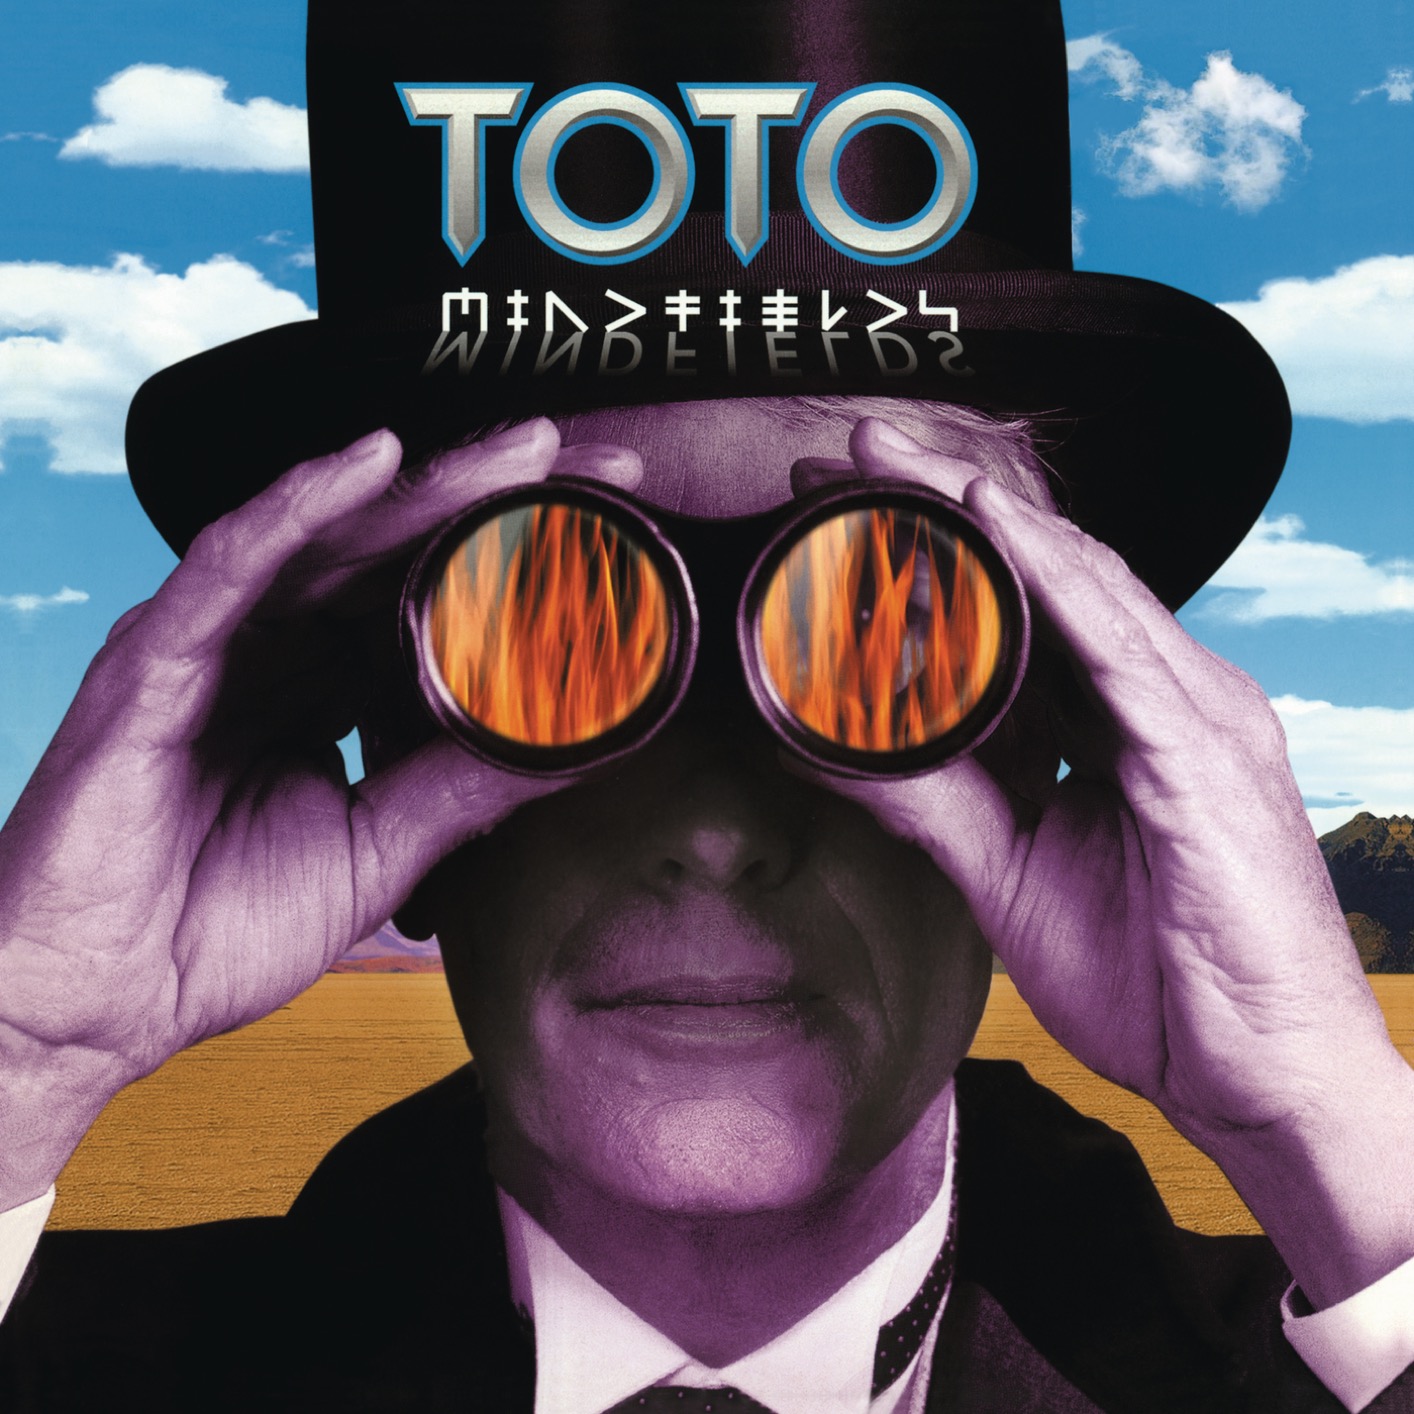 Toto – Mindfields (Remastered) (1999/2020) [FLAC 24bit/192kHz]